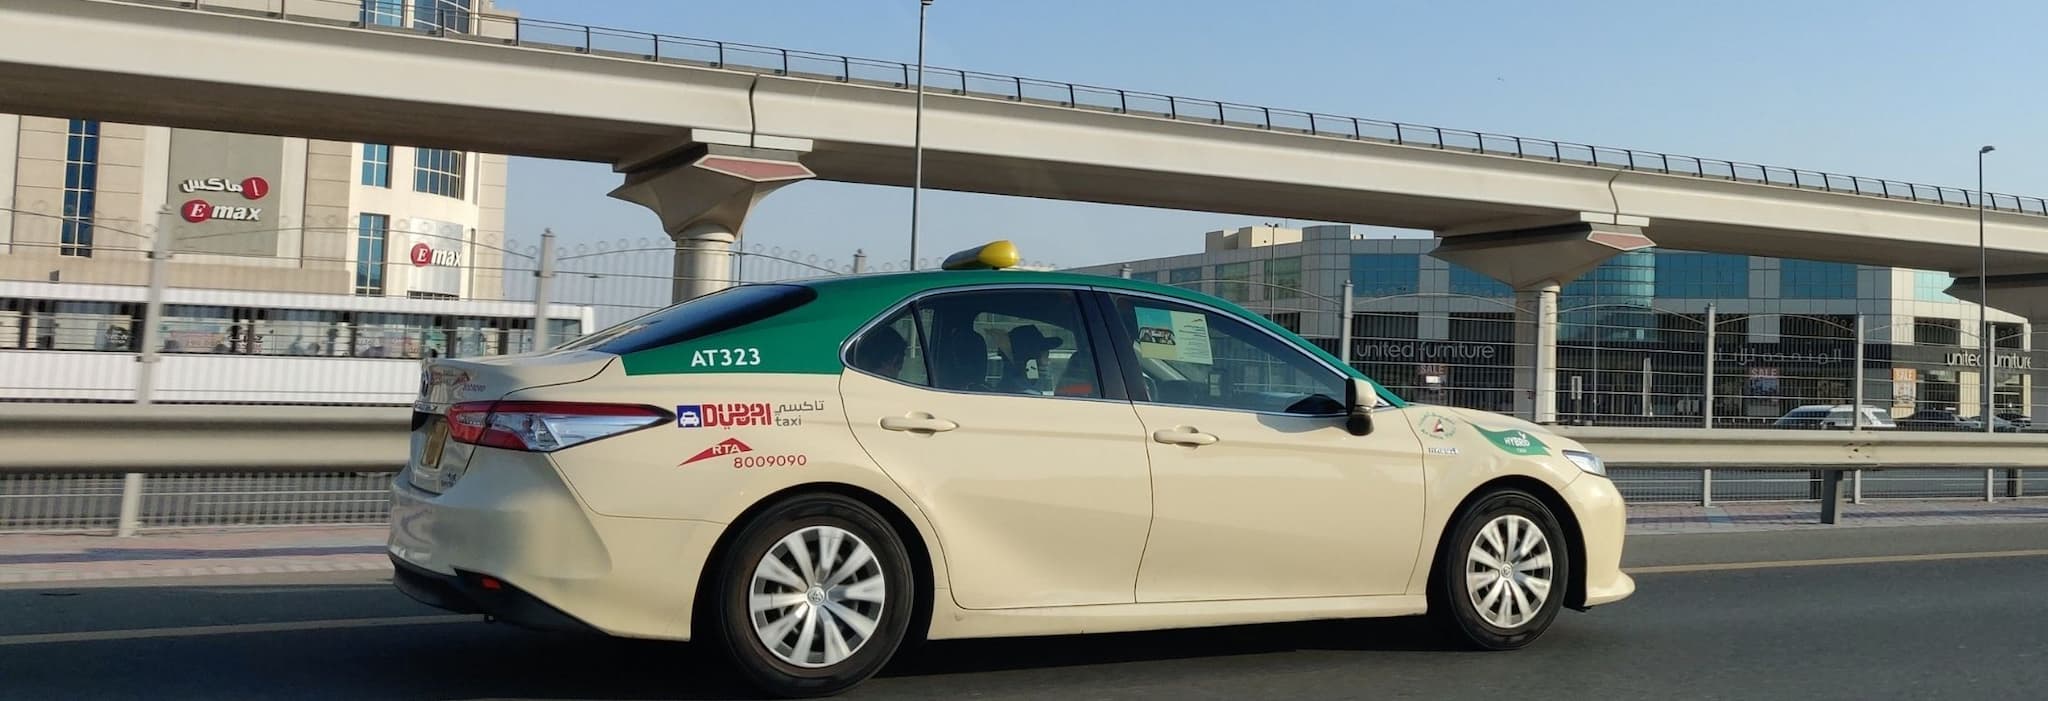 What are the general taxi fares in Dubai?